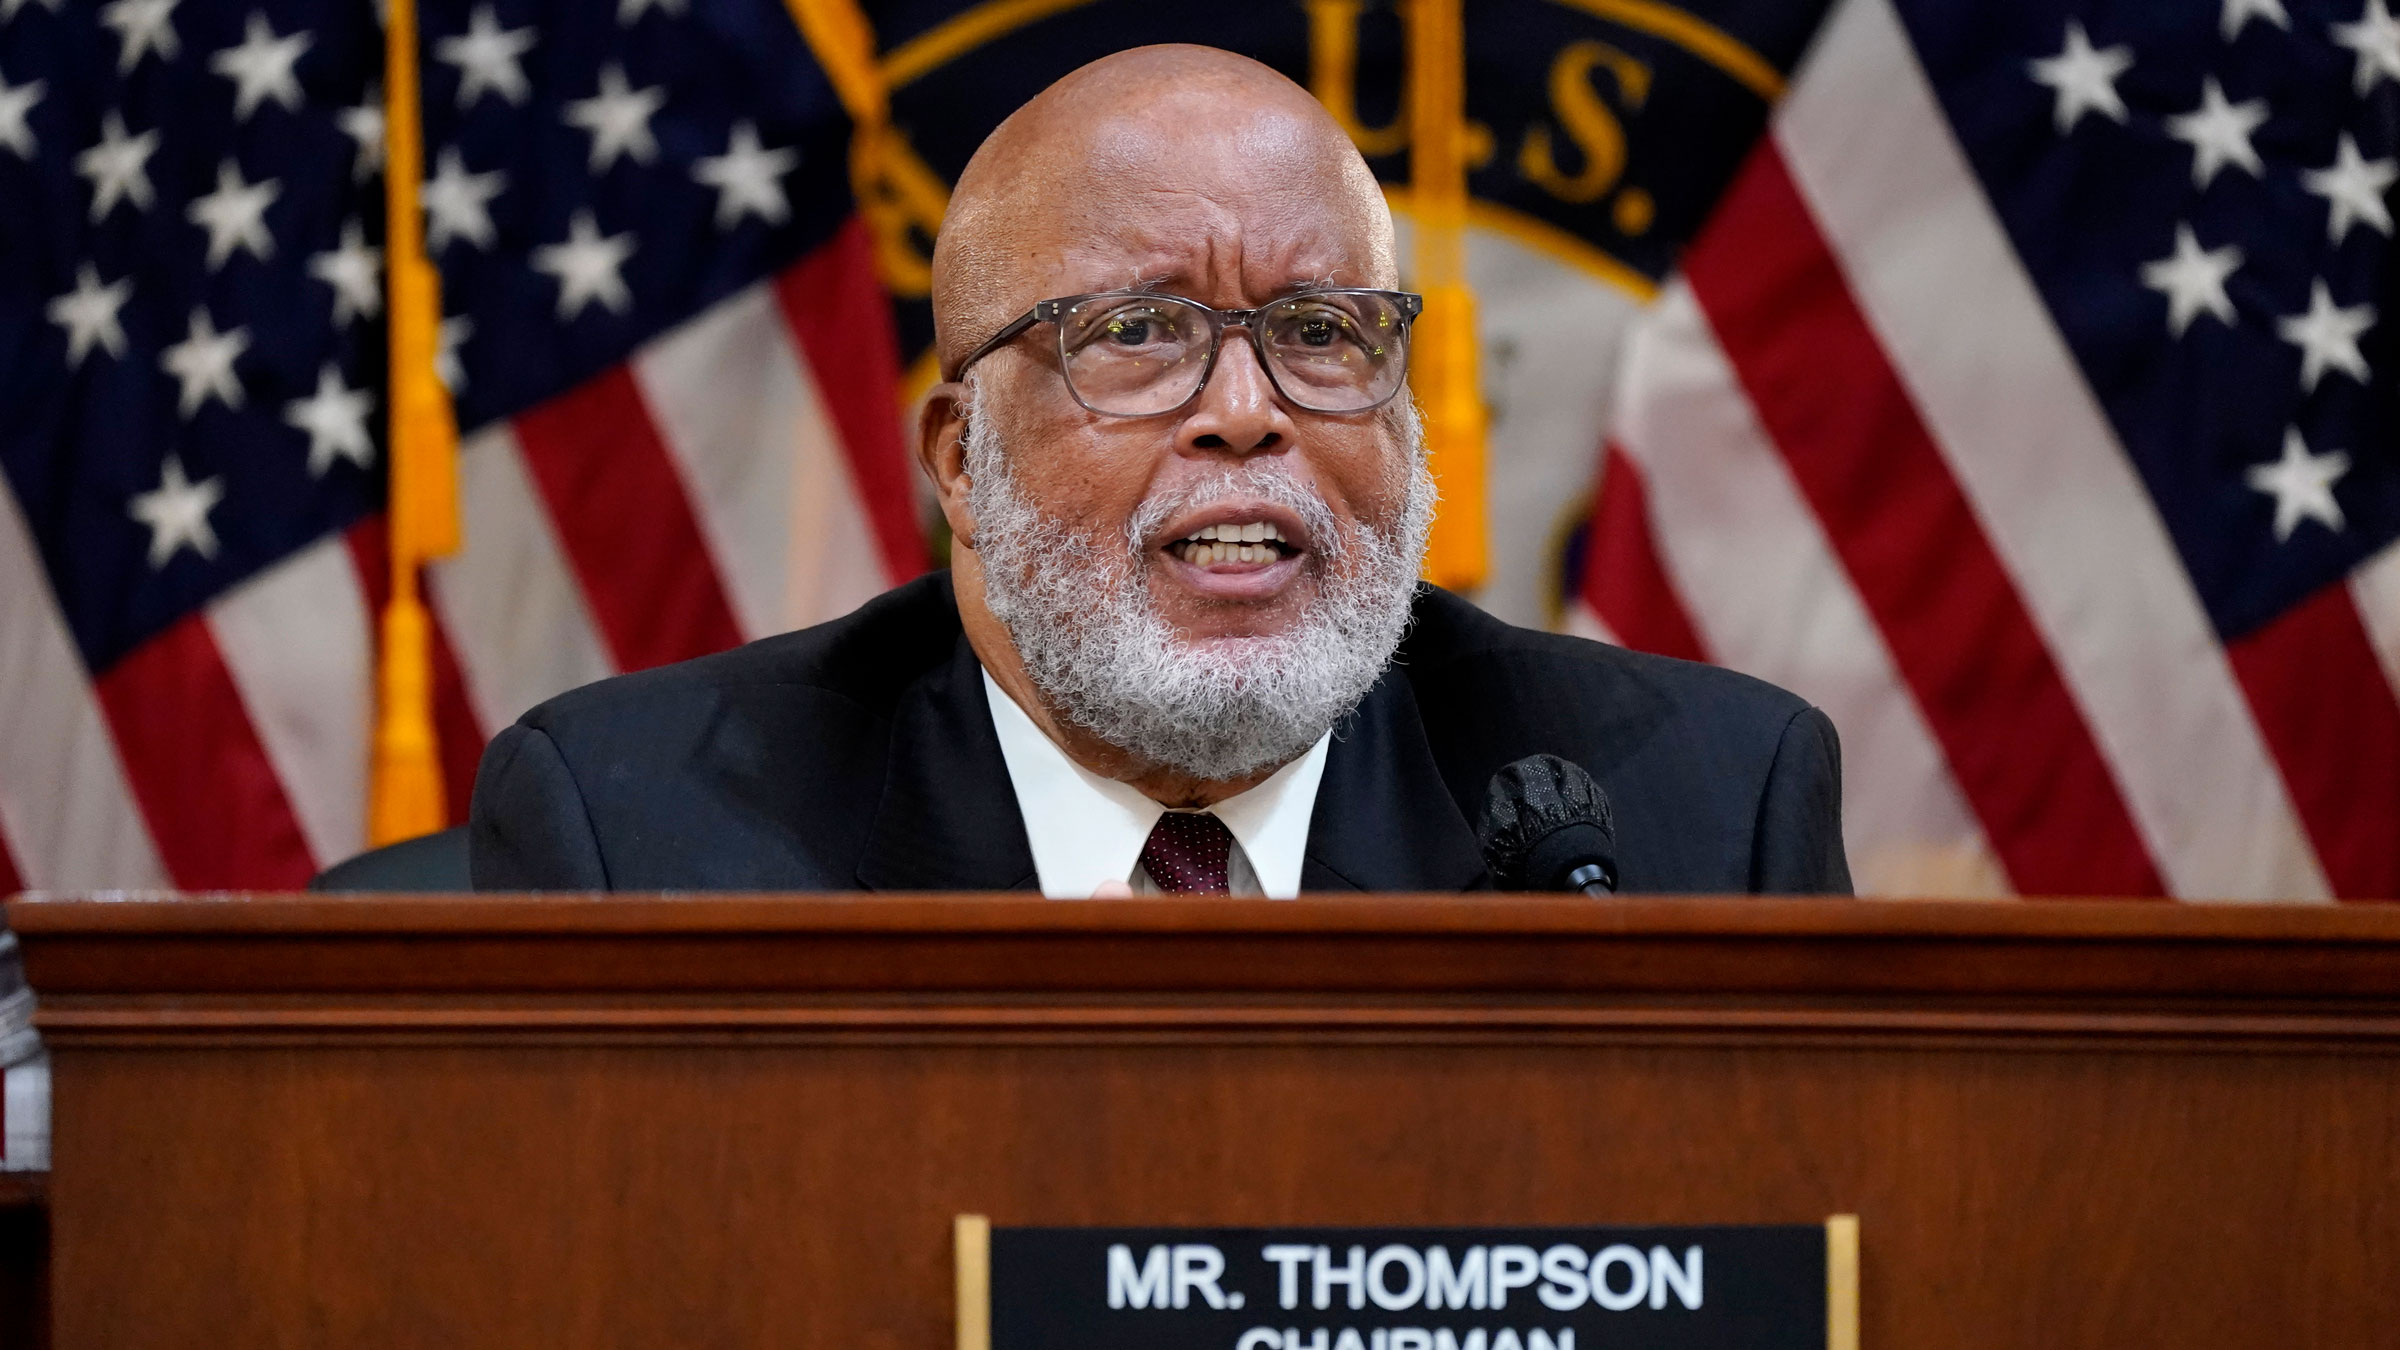 US Rep. Bennie Thompson, the committee chairman, gives opening remarks during Tuesday's hearing.